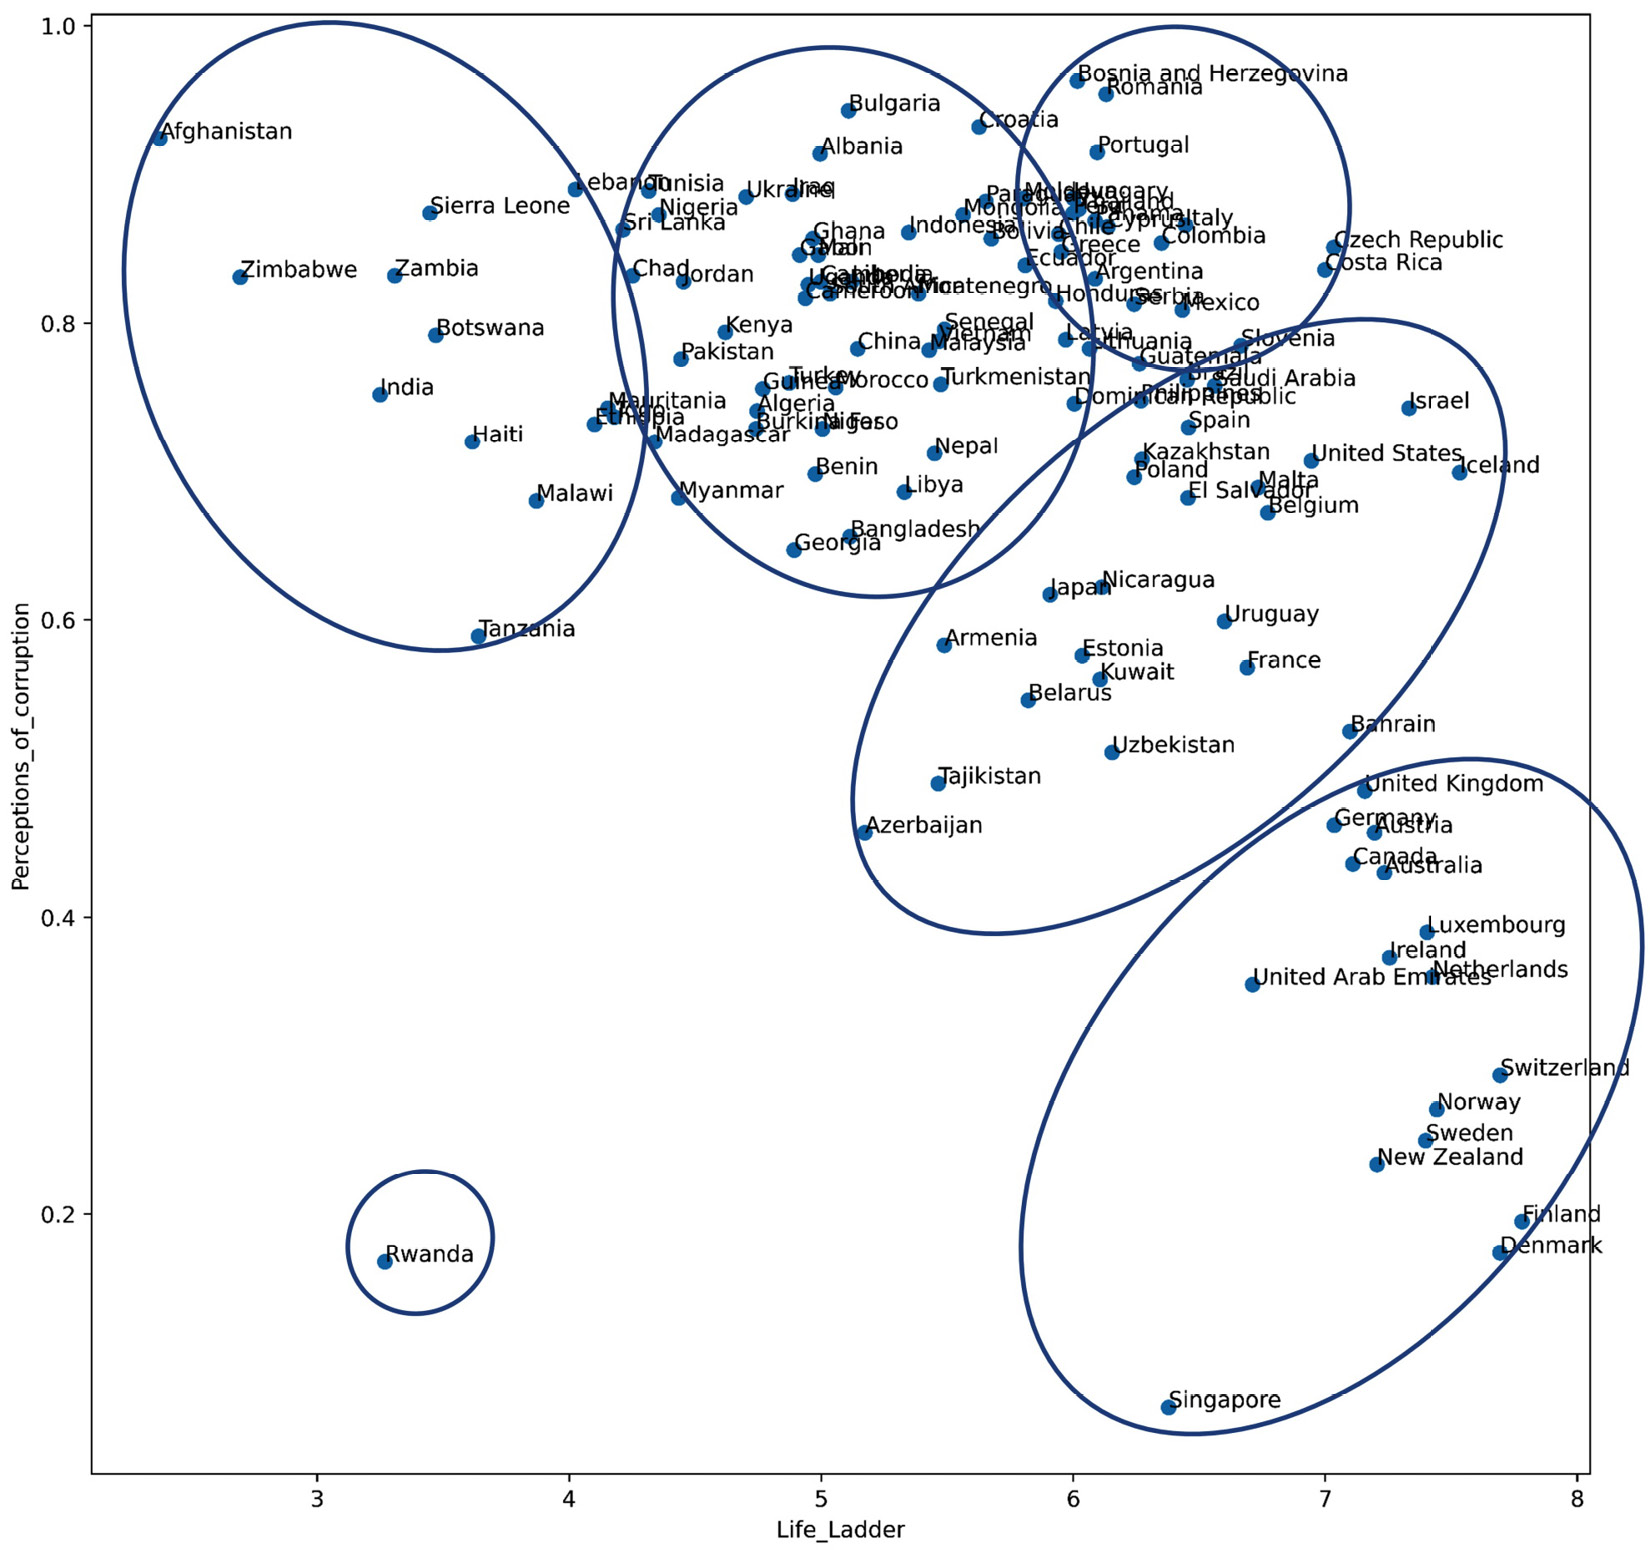 Figure 8.2 – Scatterplot and clustering of countries based on two happiness indices called Life_Ladder and Perceptions_of_corruption in 2019
